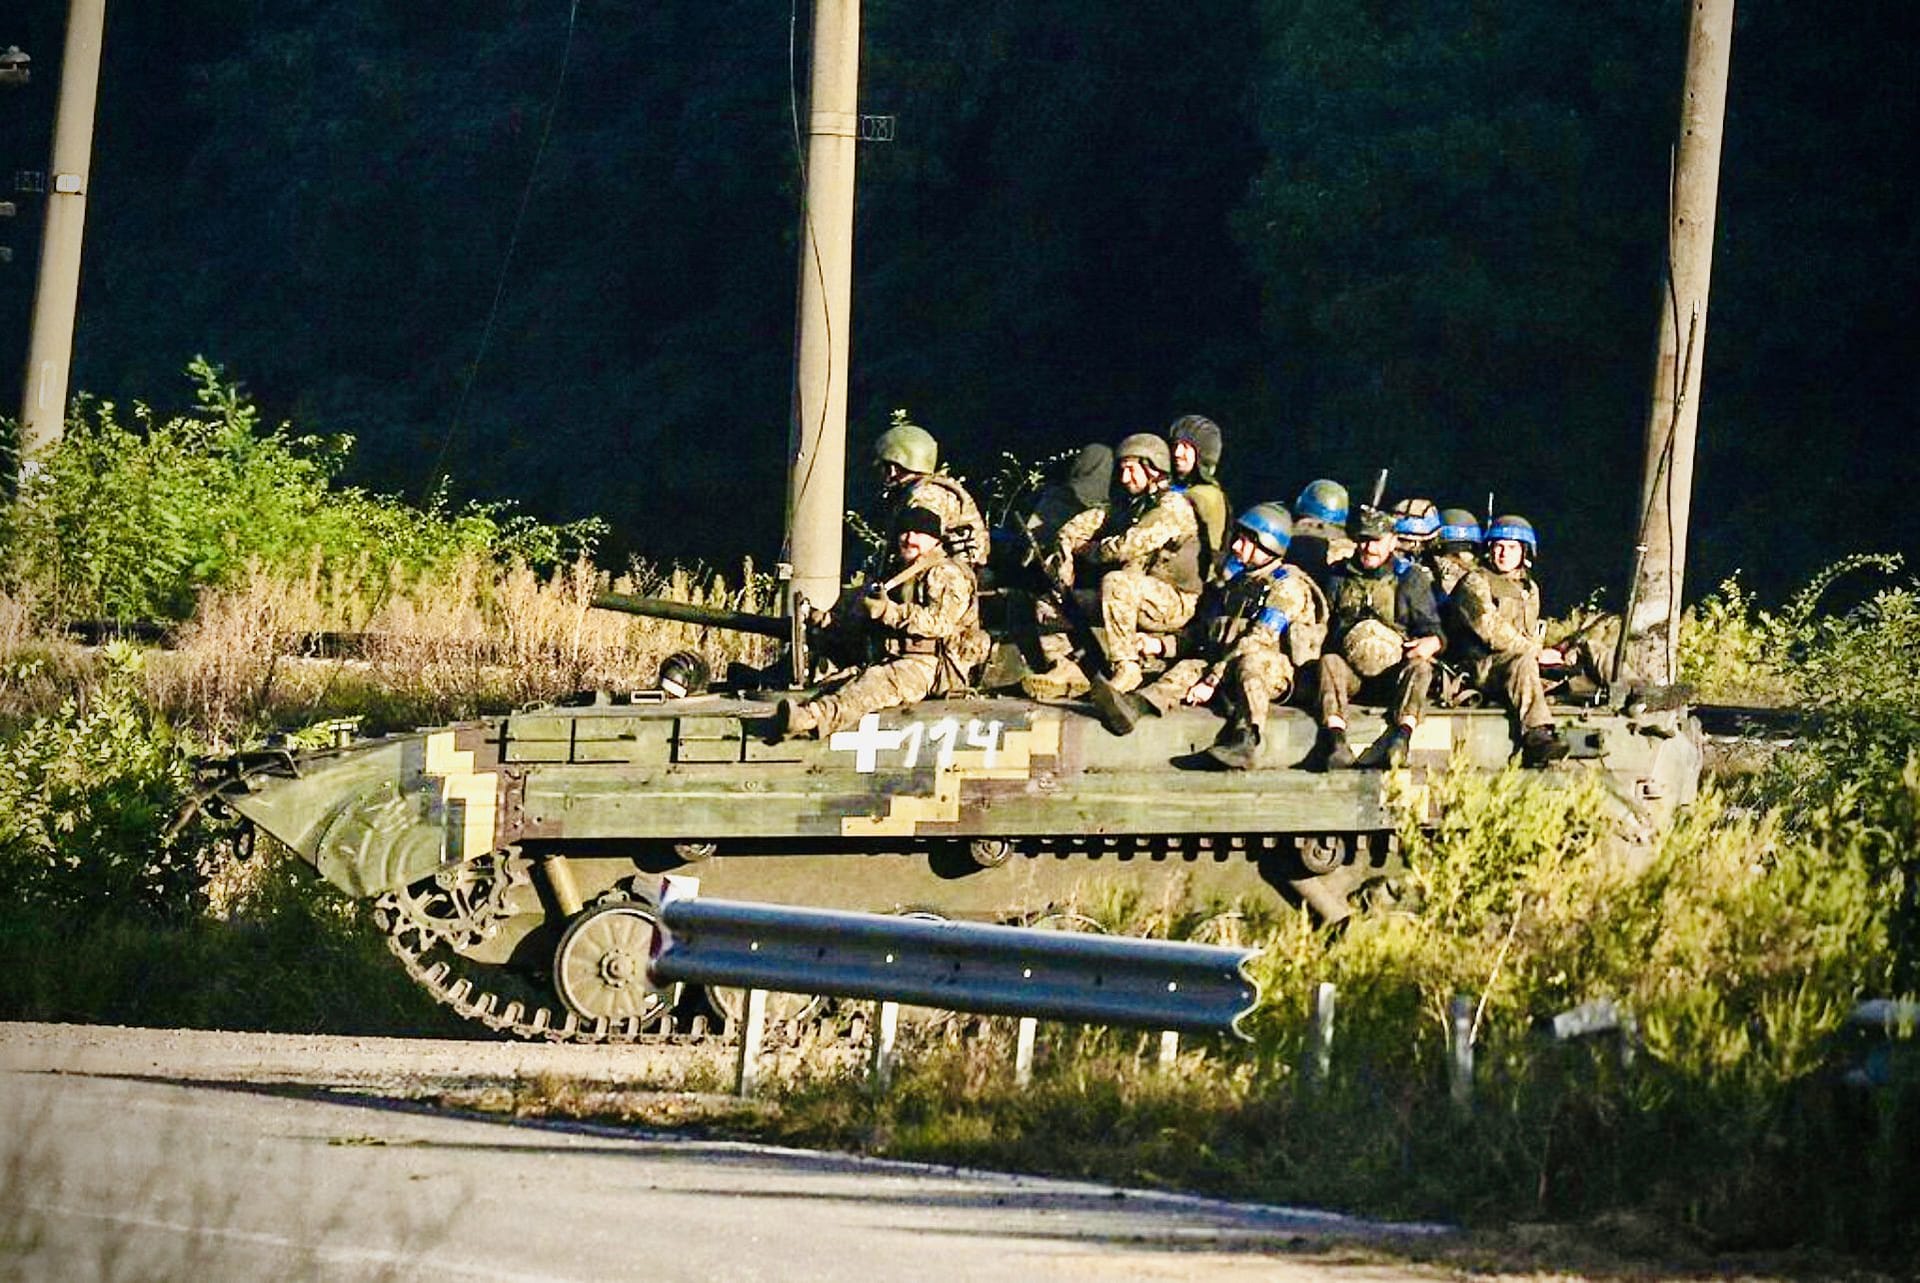 Ukrainian fighters in Kharkiv on Friday. President Volodymyr Zelensky said his military had captured large chunks of occupied territory in the north.